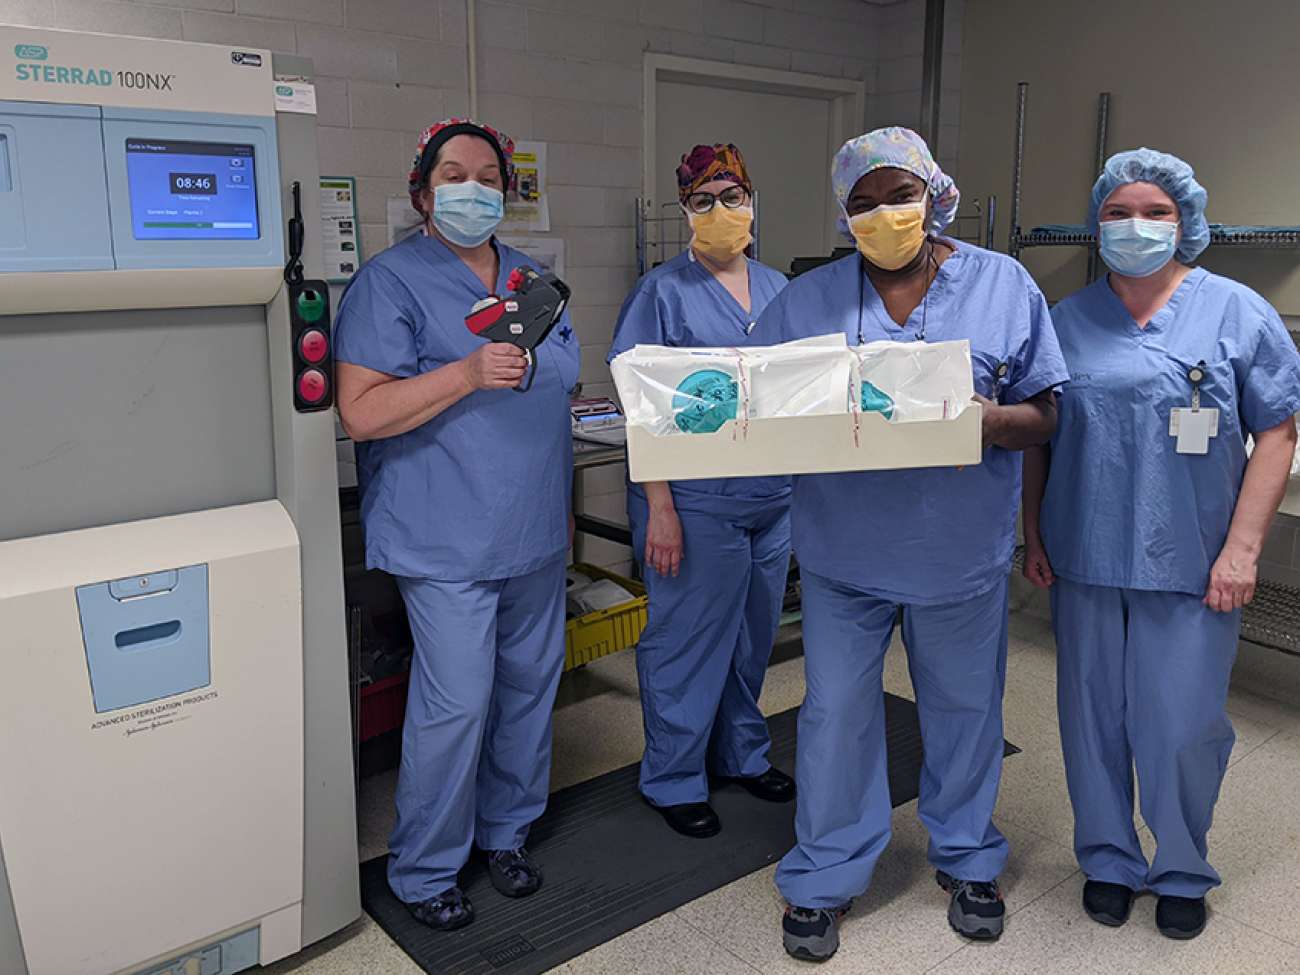 Kelly, Tabitha, Sharon, and Cindy are a few of the many MDRD technicians reprocessing masks at GRH.